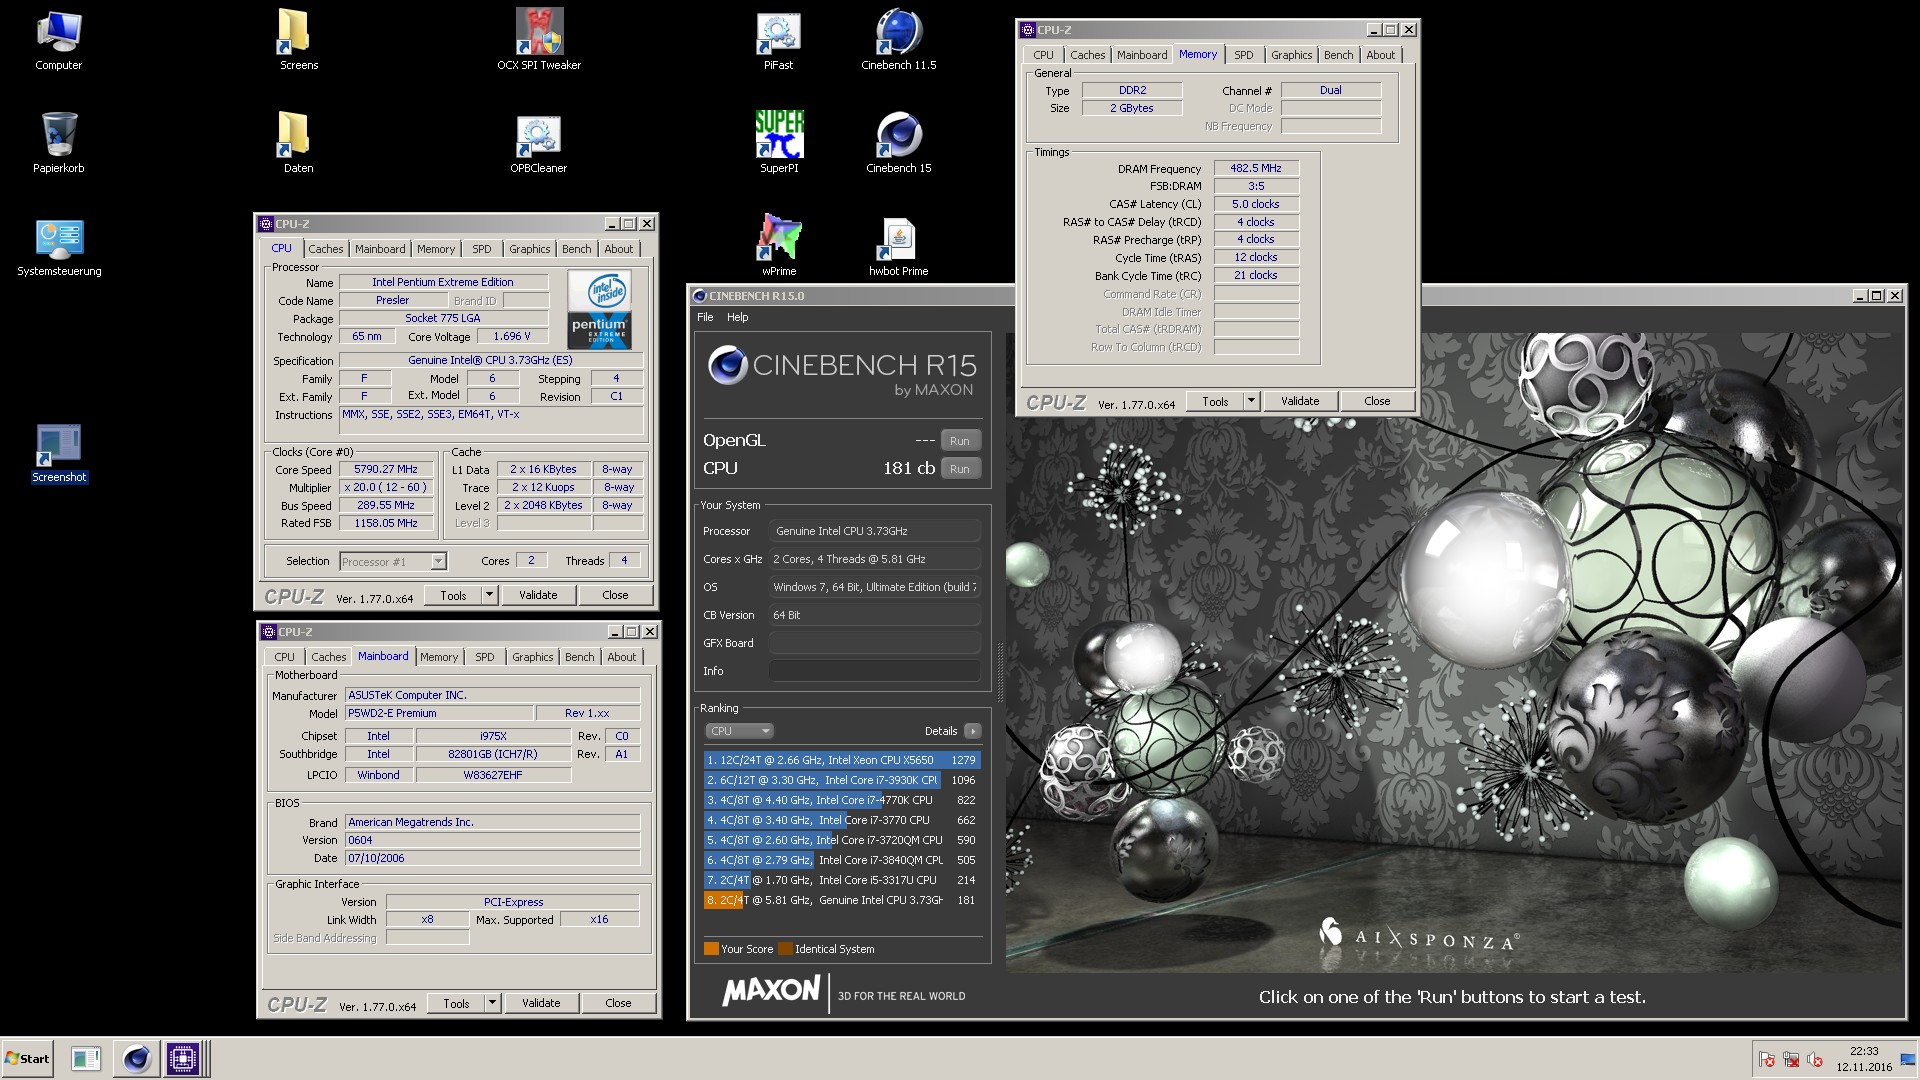 BenchBrothers.de`s Cinebench - R15 score: 181 cb with a Pentium Extreme  Edition 965